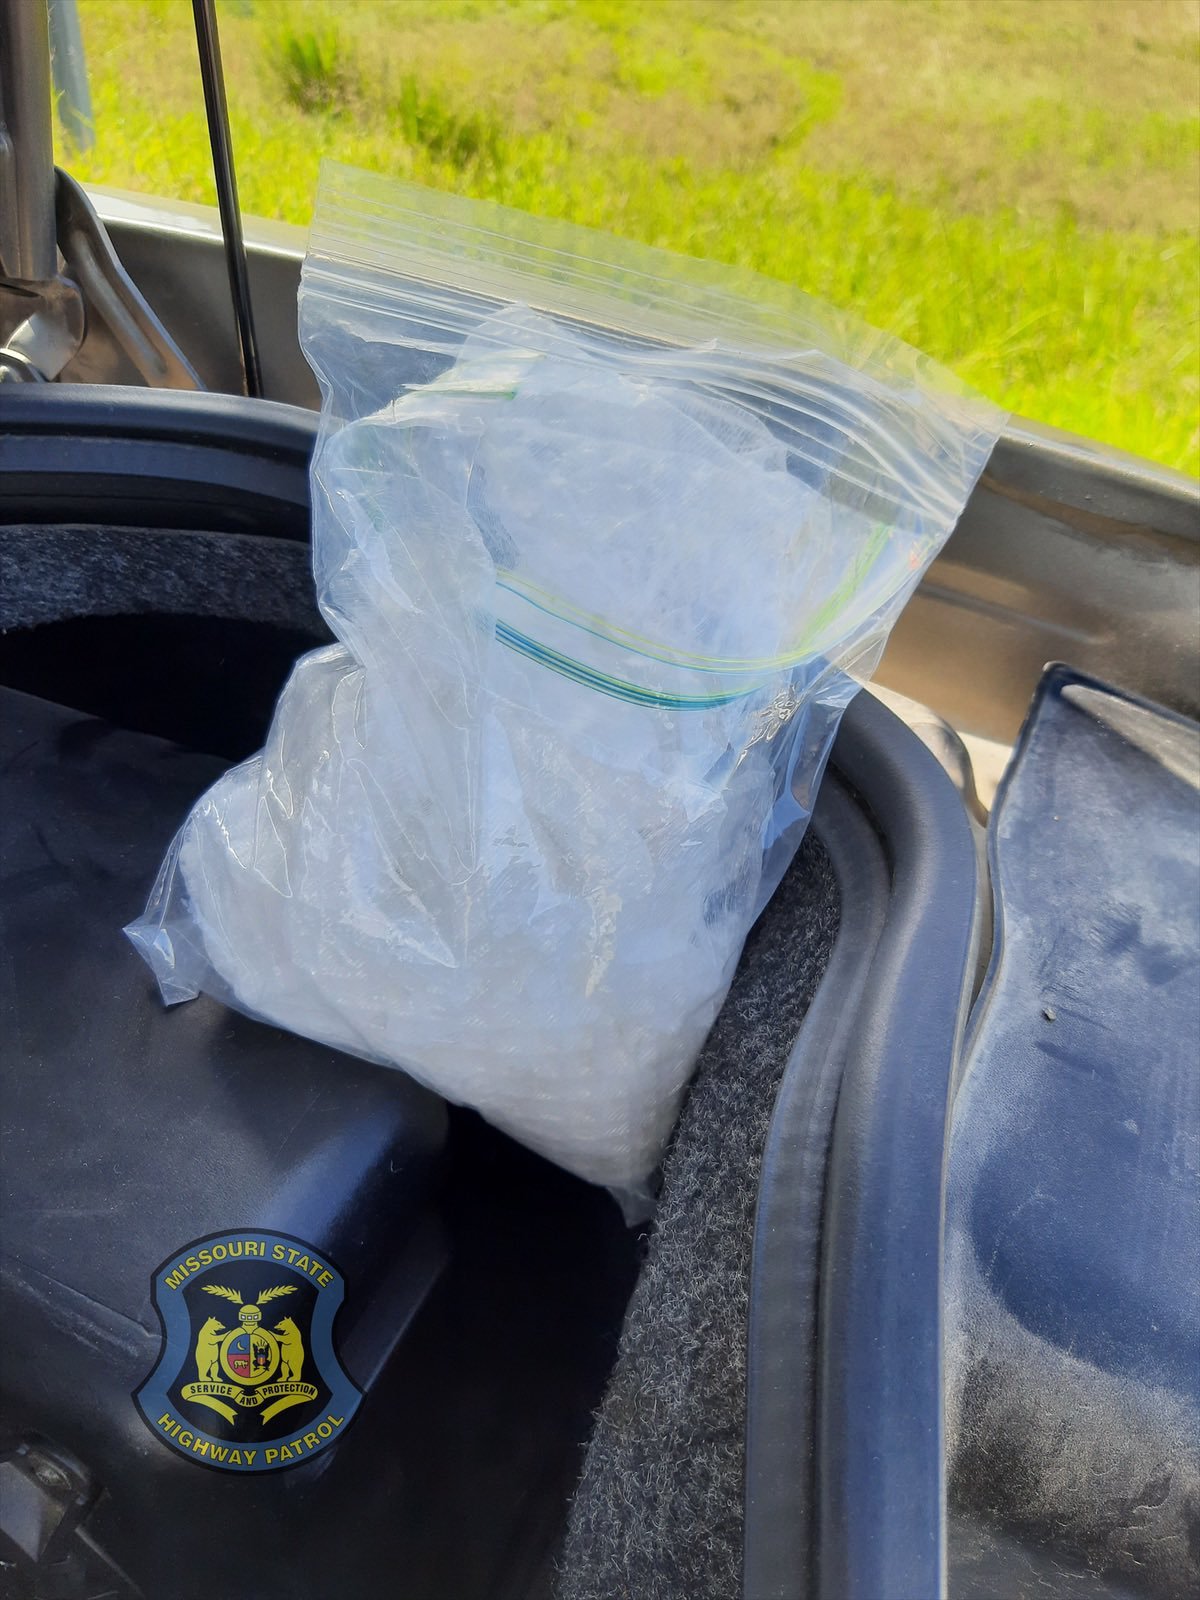 State Troopers stopped a vehicle for following too close yesterday on eastbound I-70 in Cooper County. A search of the vehicle revealed approximately one pound of methamphetamine in the trunk.